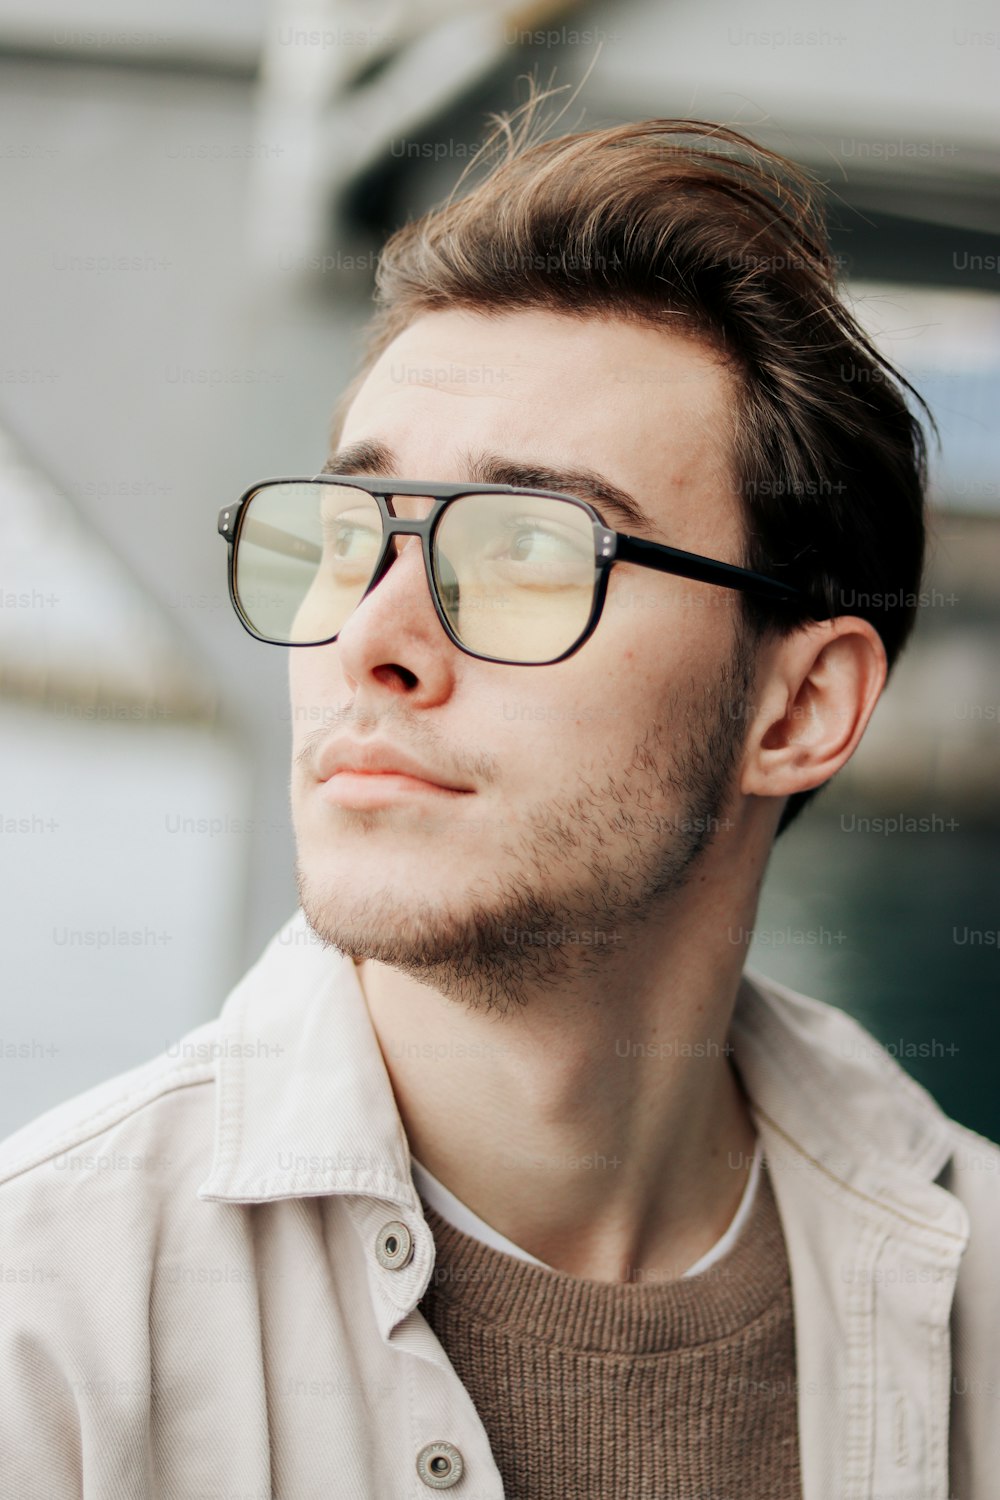 750+ [HQ] Glasses Pictures  Download Free Images on Unsplash